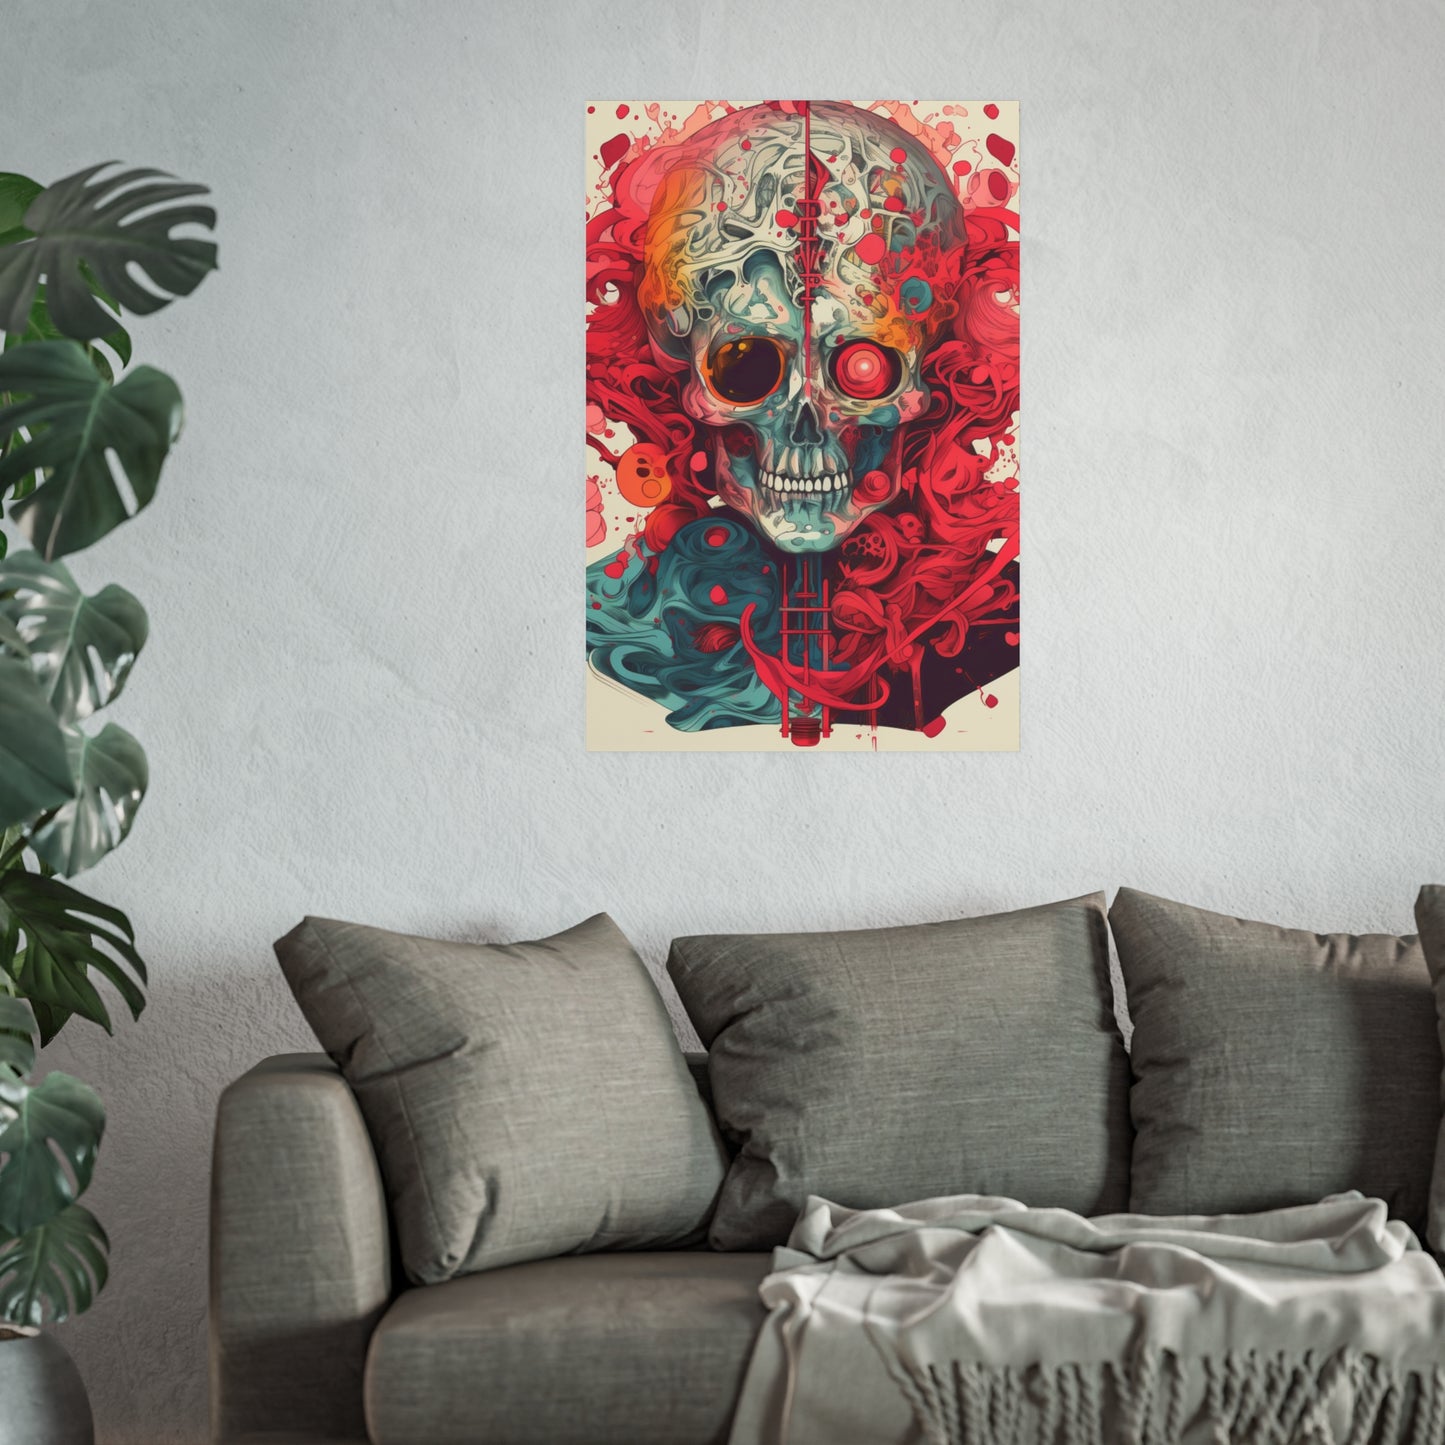 Unleash Power: Atomic Skull Poster for Bold Statements3